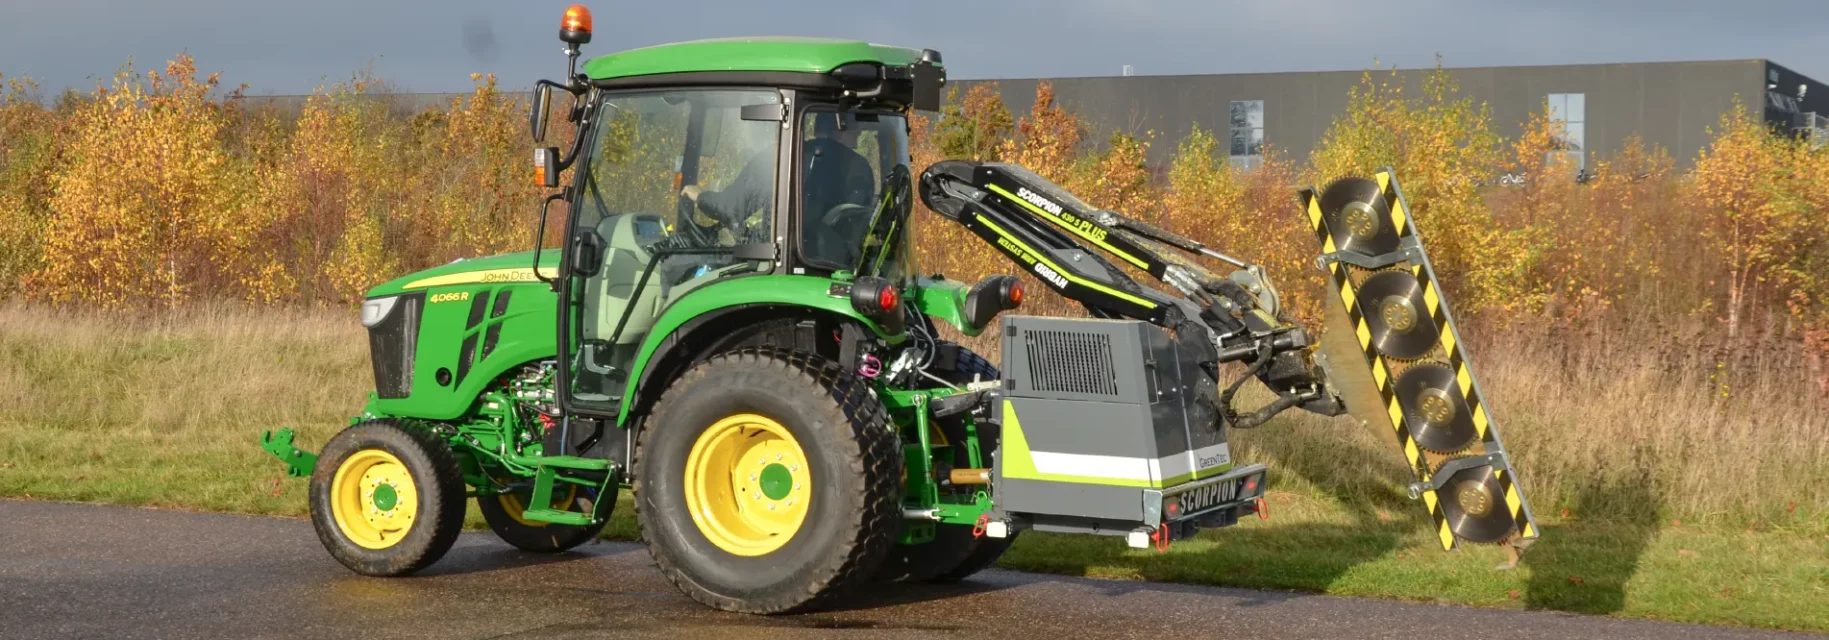 Boom mower in transport position on small tractor